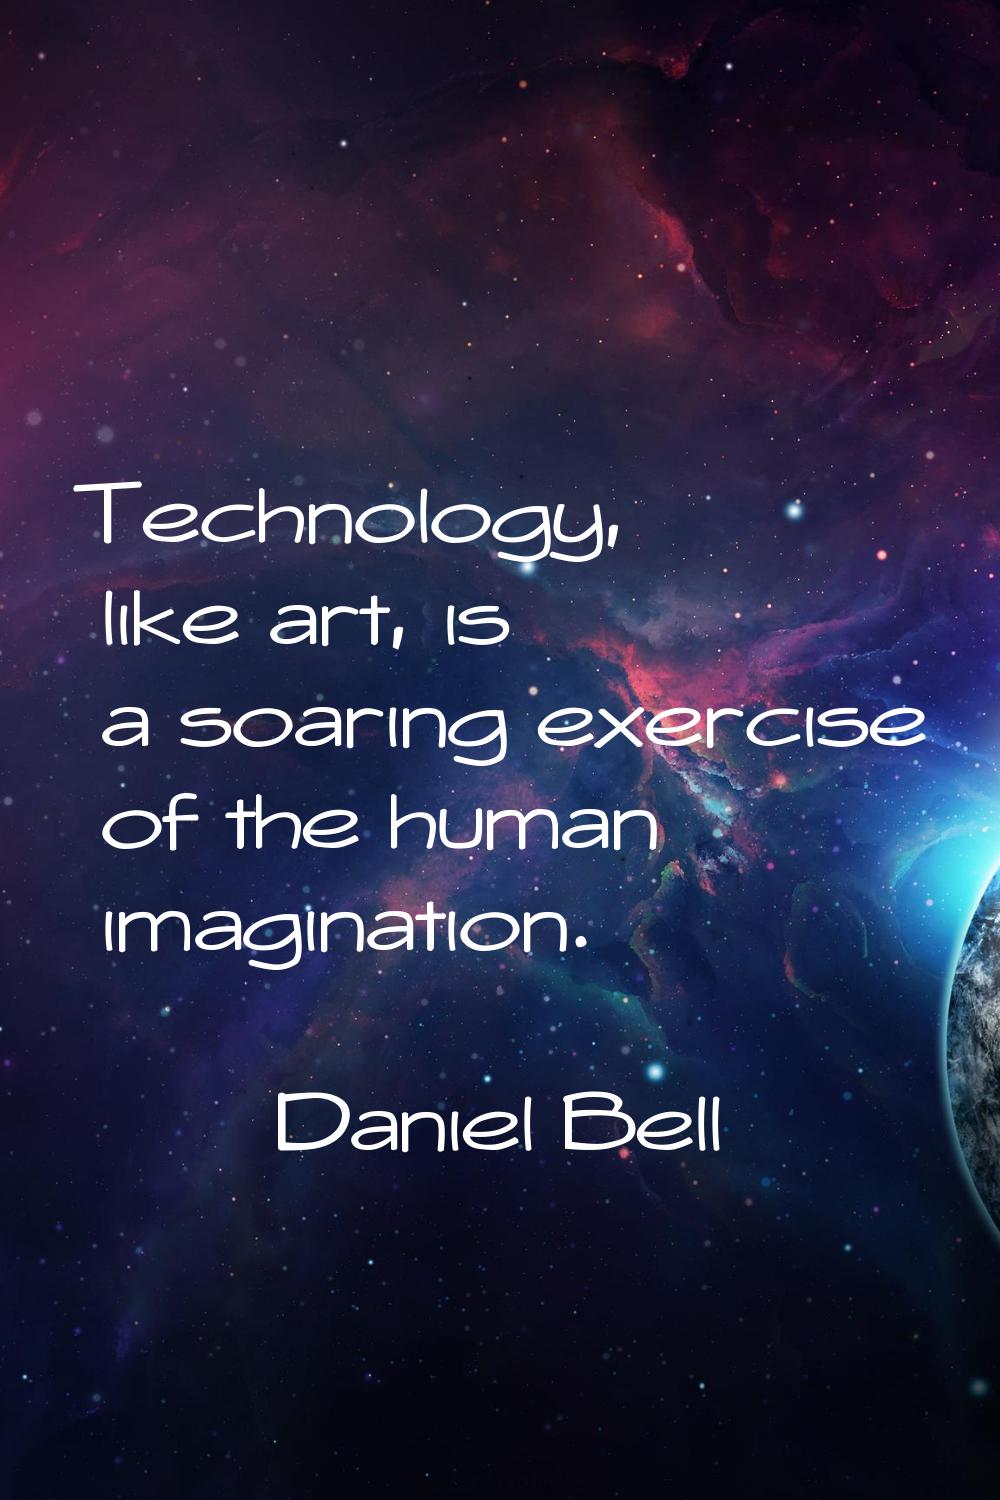 Technology, like art, is a soaring exercise of the human imagination.